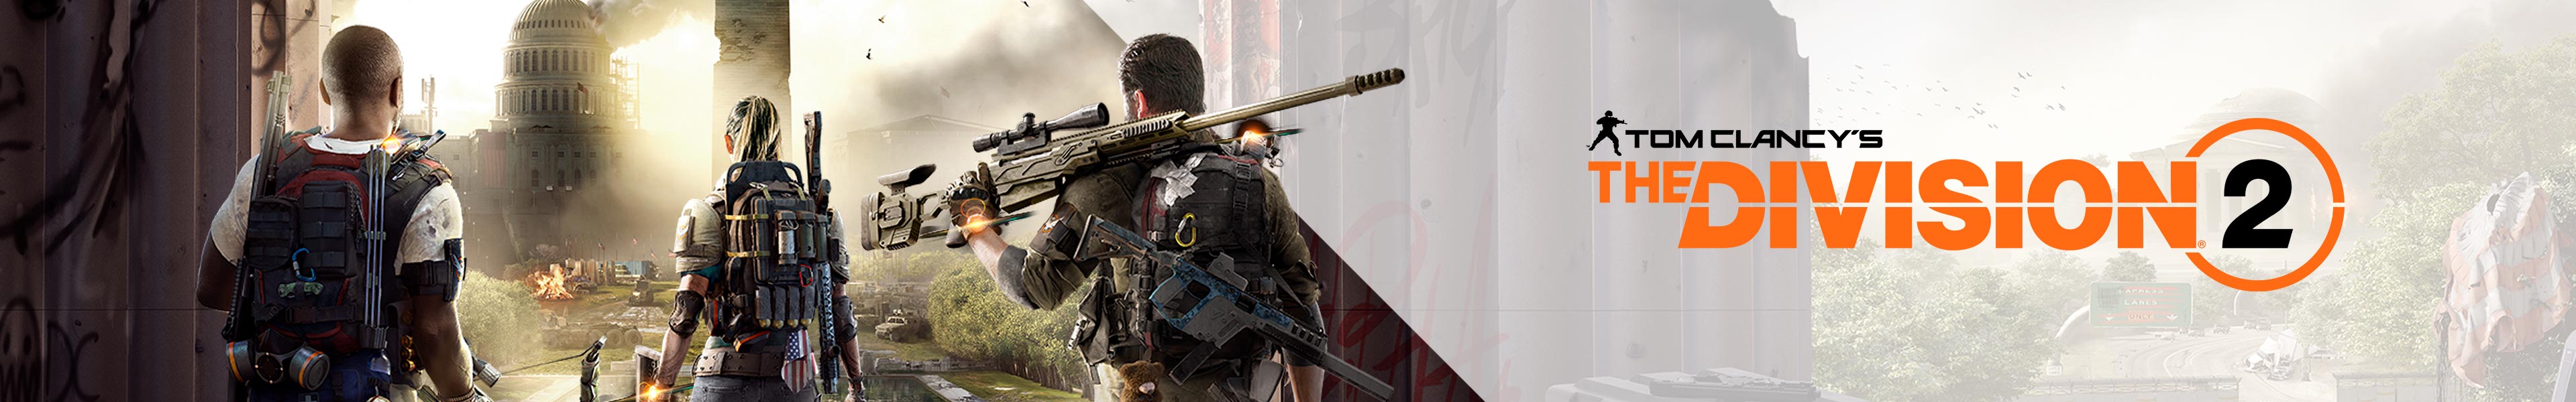 The Division 2 Category banner